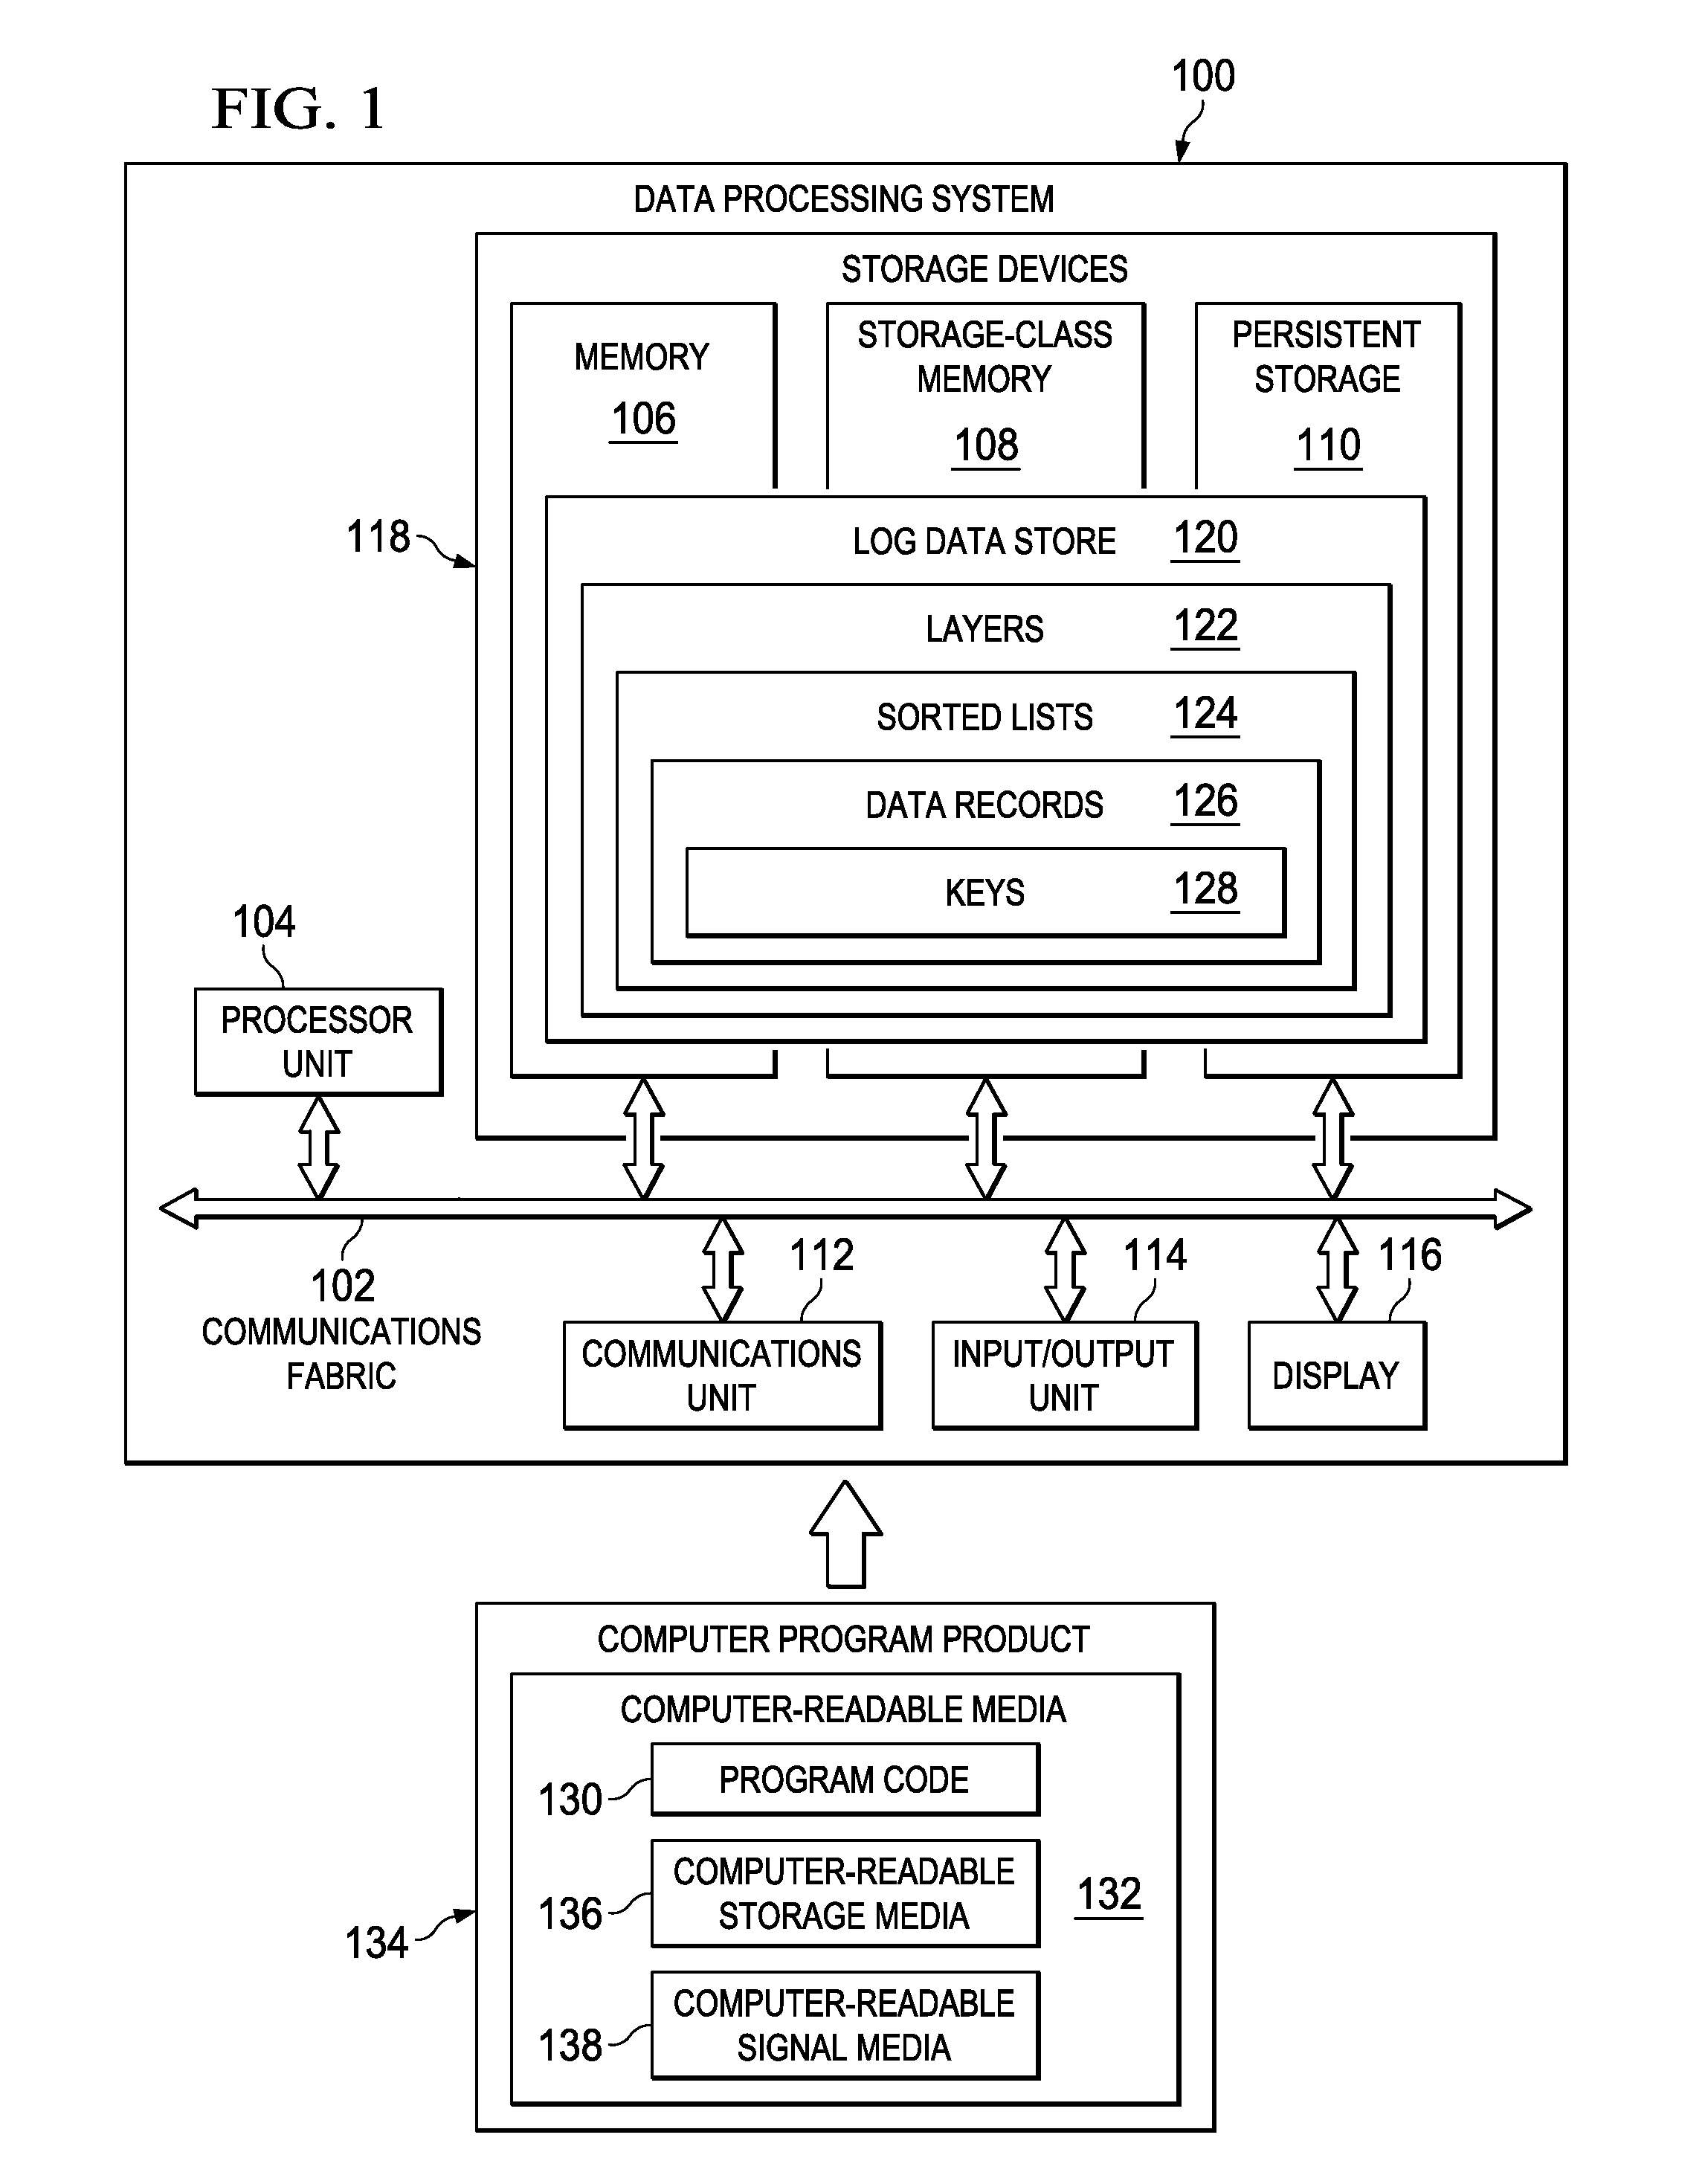 Log data store that stores data across a plurality of storage devices using non-disjoint layers